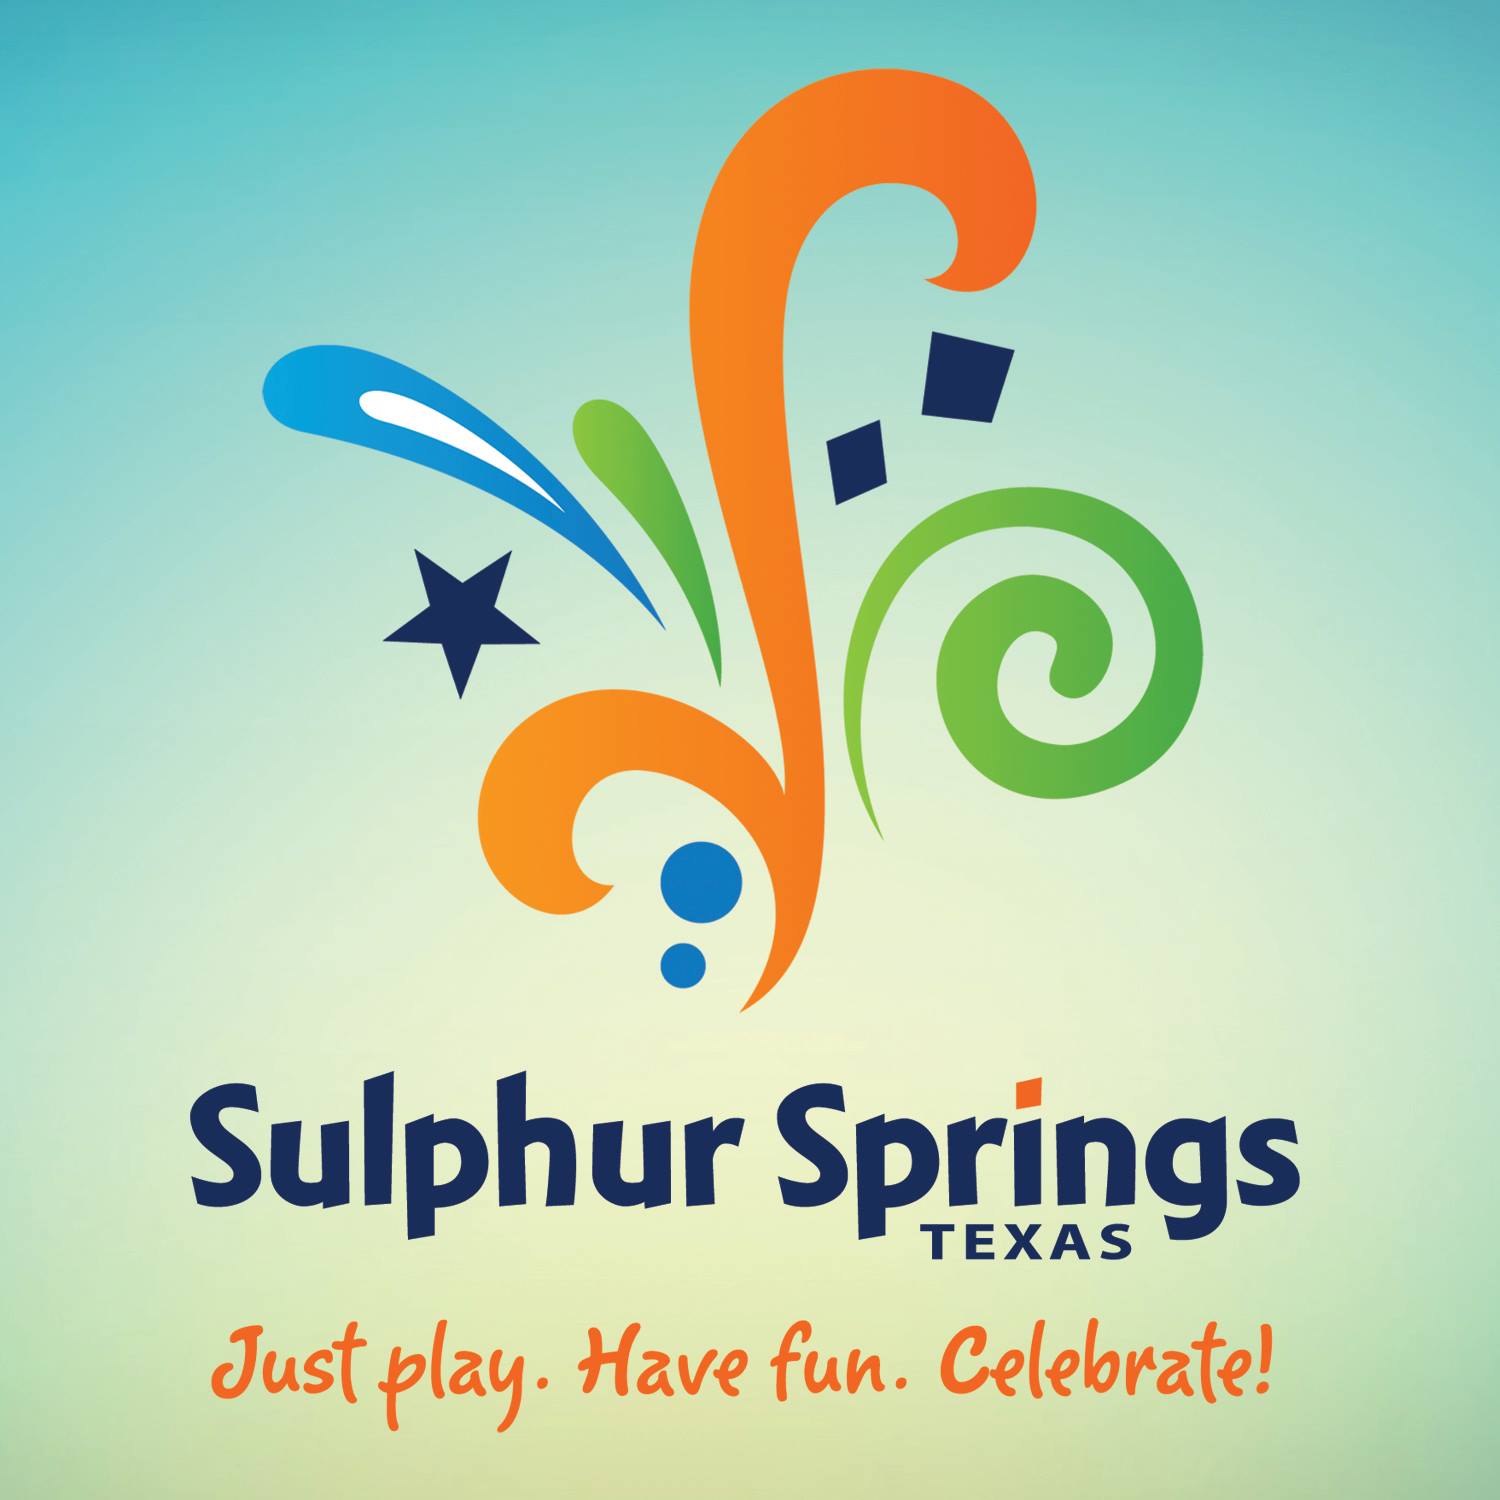 City of Sulphur Springs Cancels Downtown Movie Night and Celebration